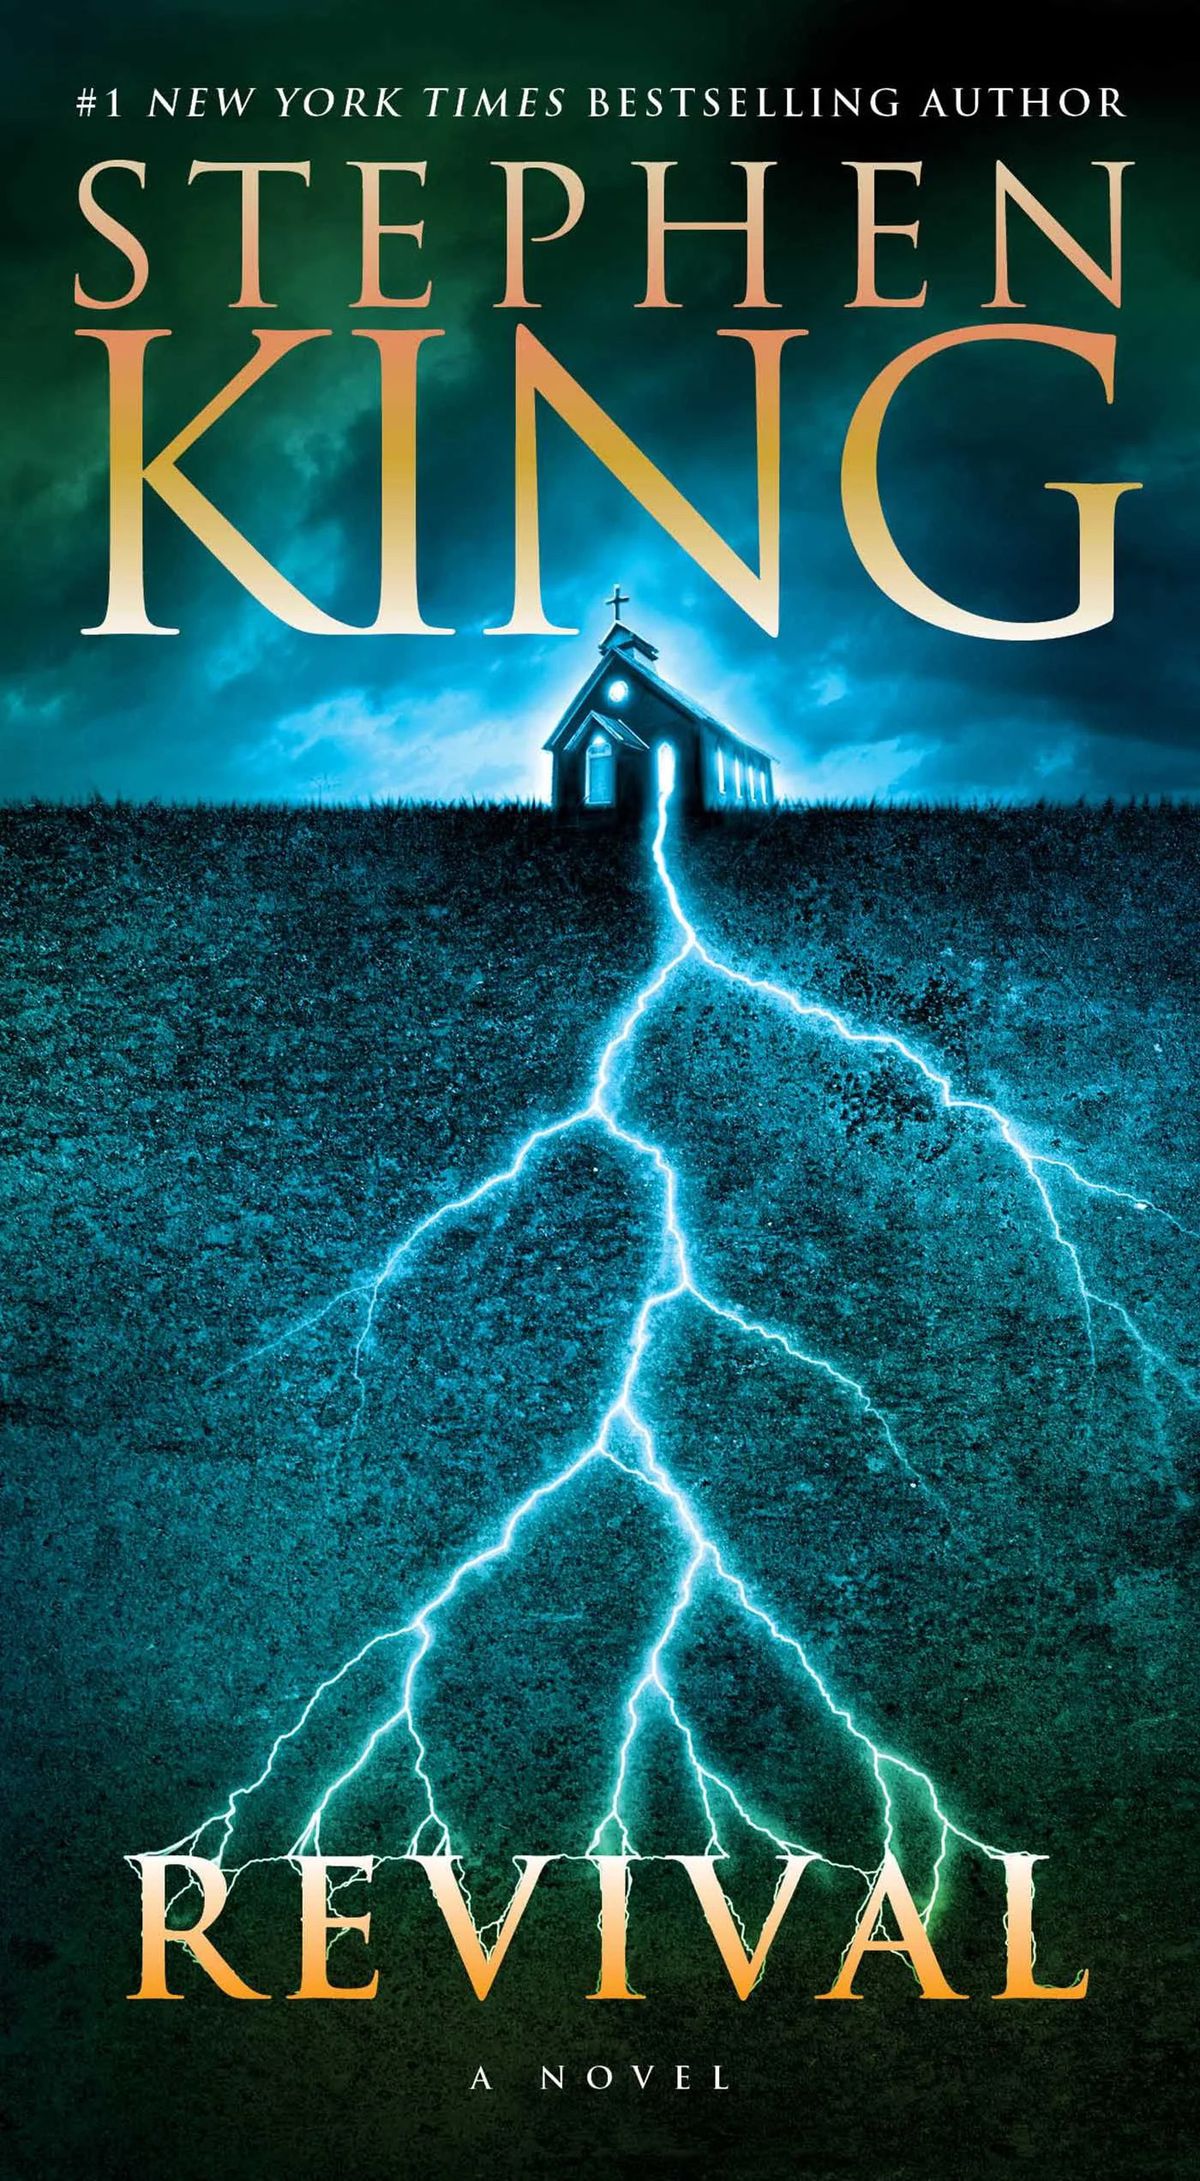 A cover for Stephen King’s novel Revival, showing a small farmhouse with blue lightning reaching from it deep into the ground